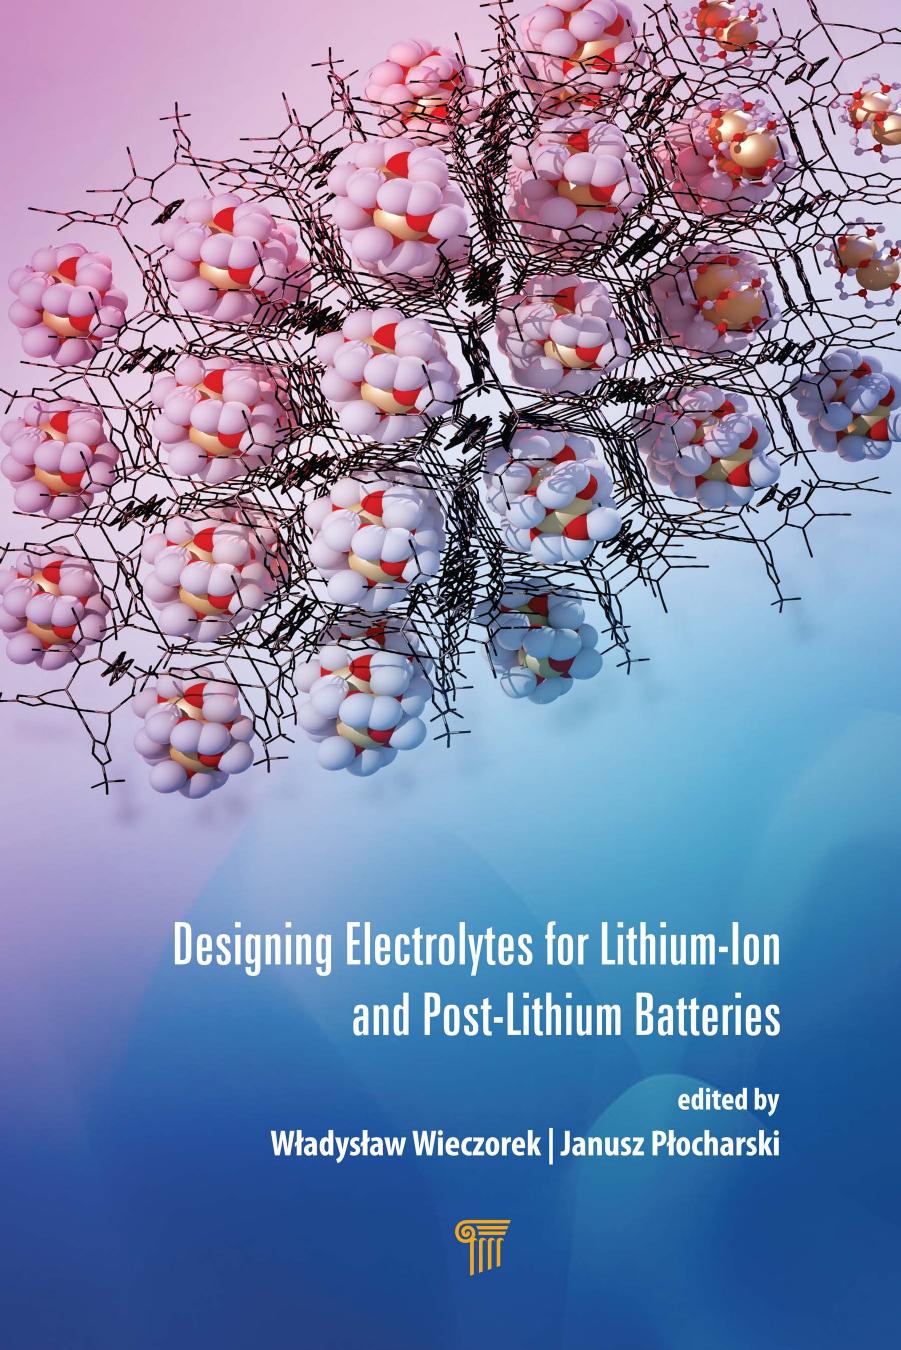 Designing electrolytes for lithium-ion and post lithium batteries